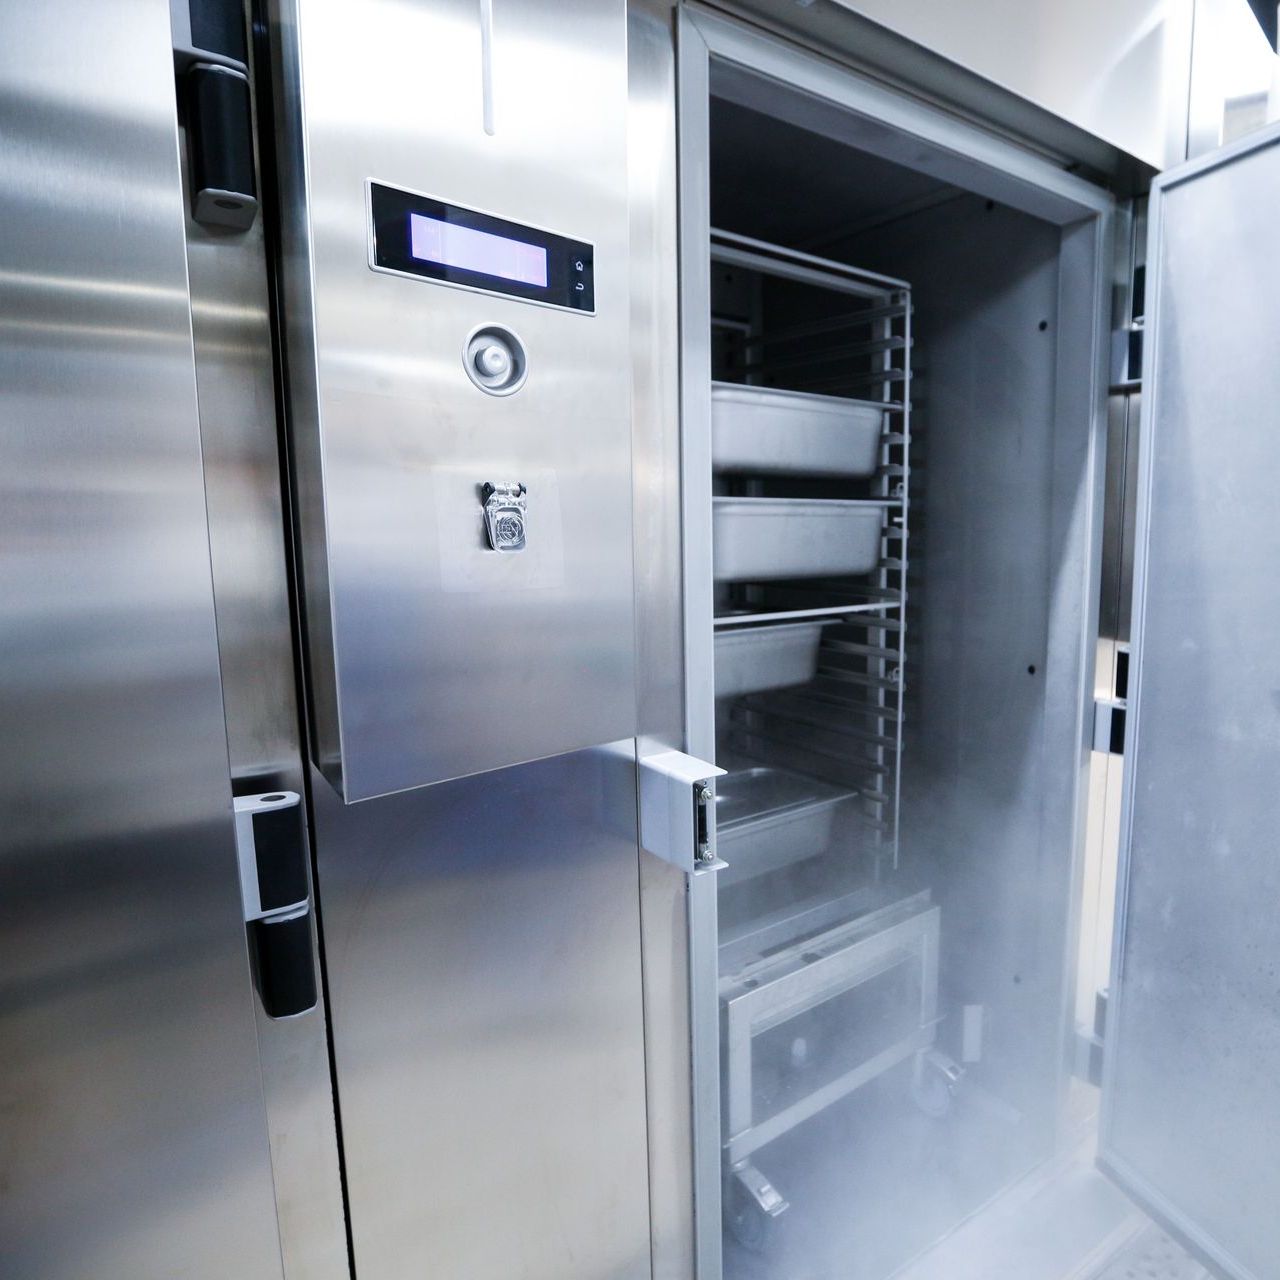 a stainless steel refrigerator with the door open